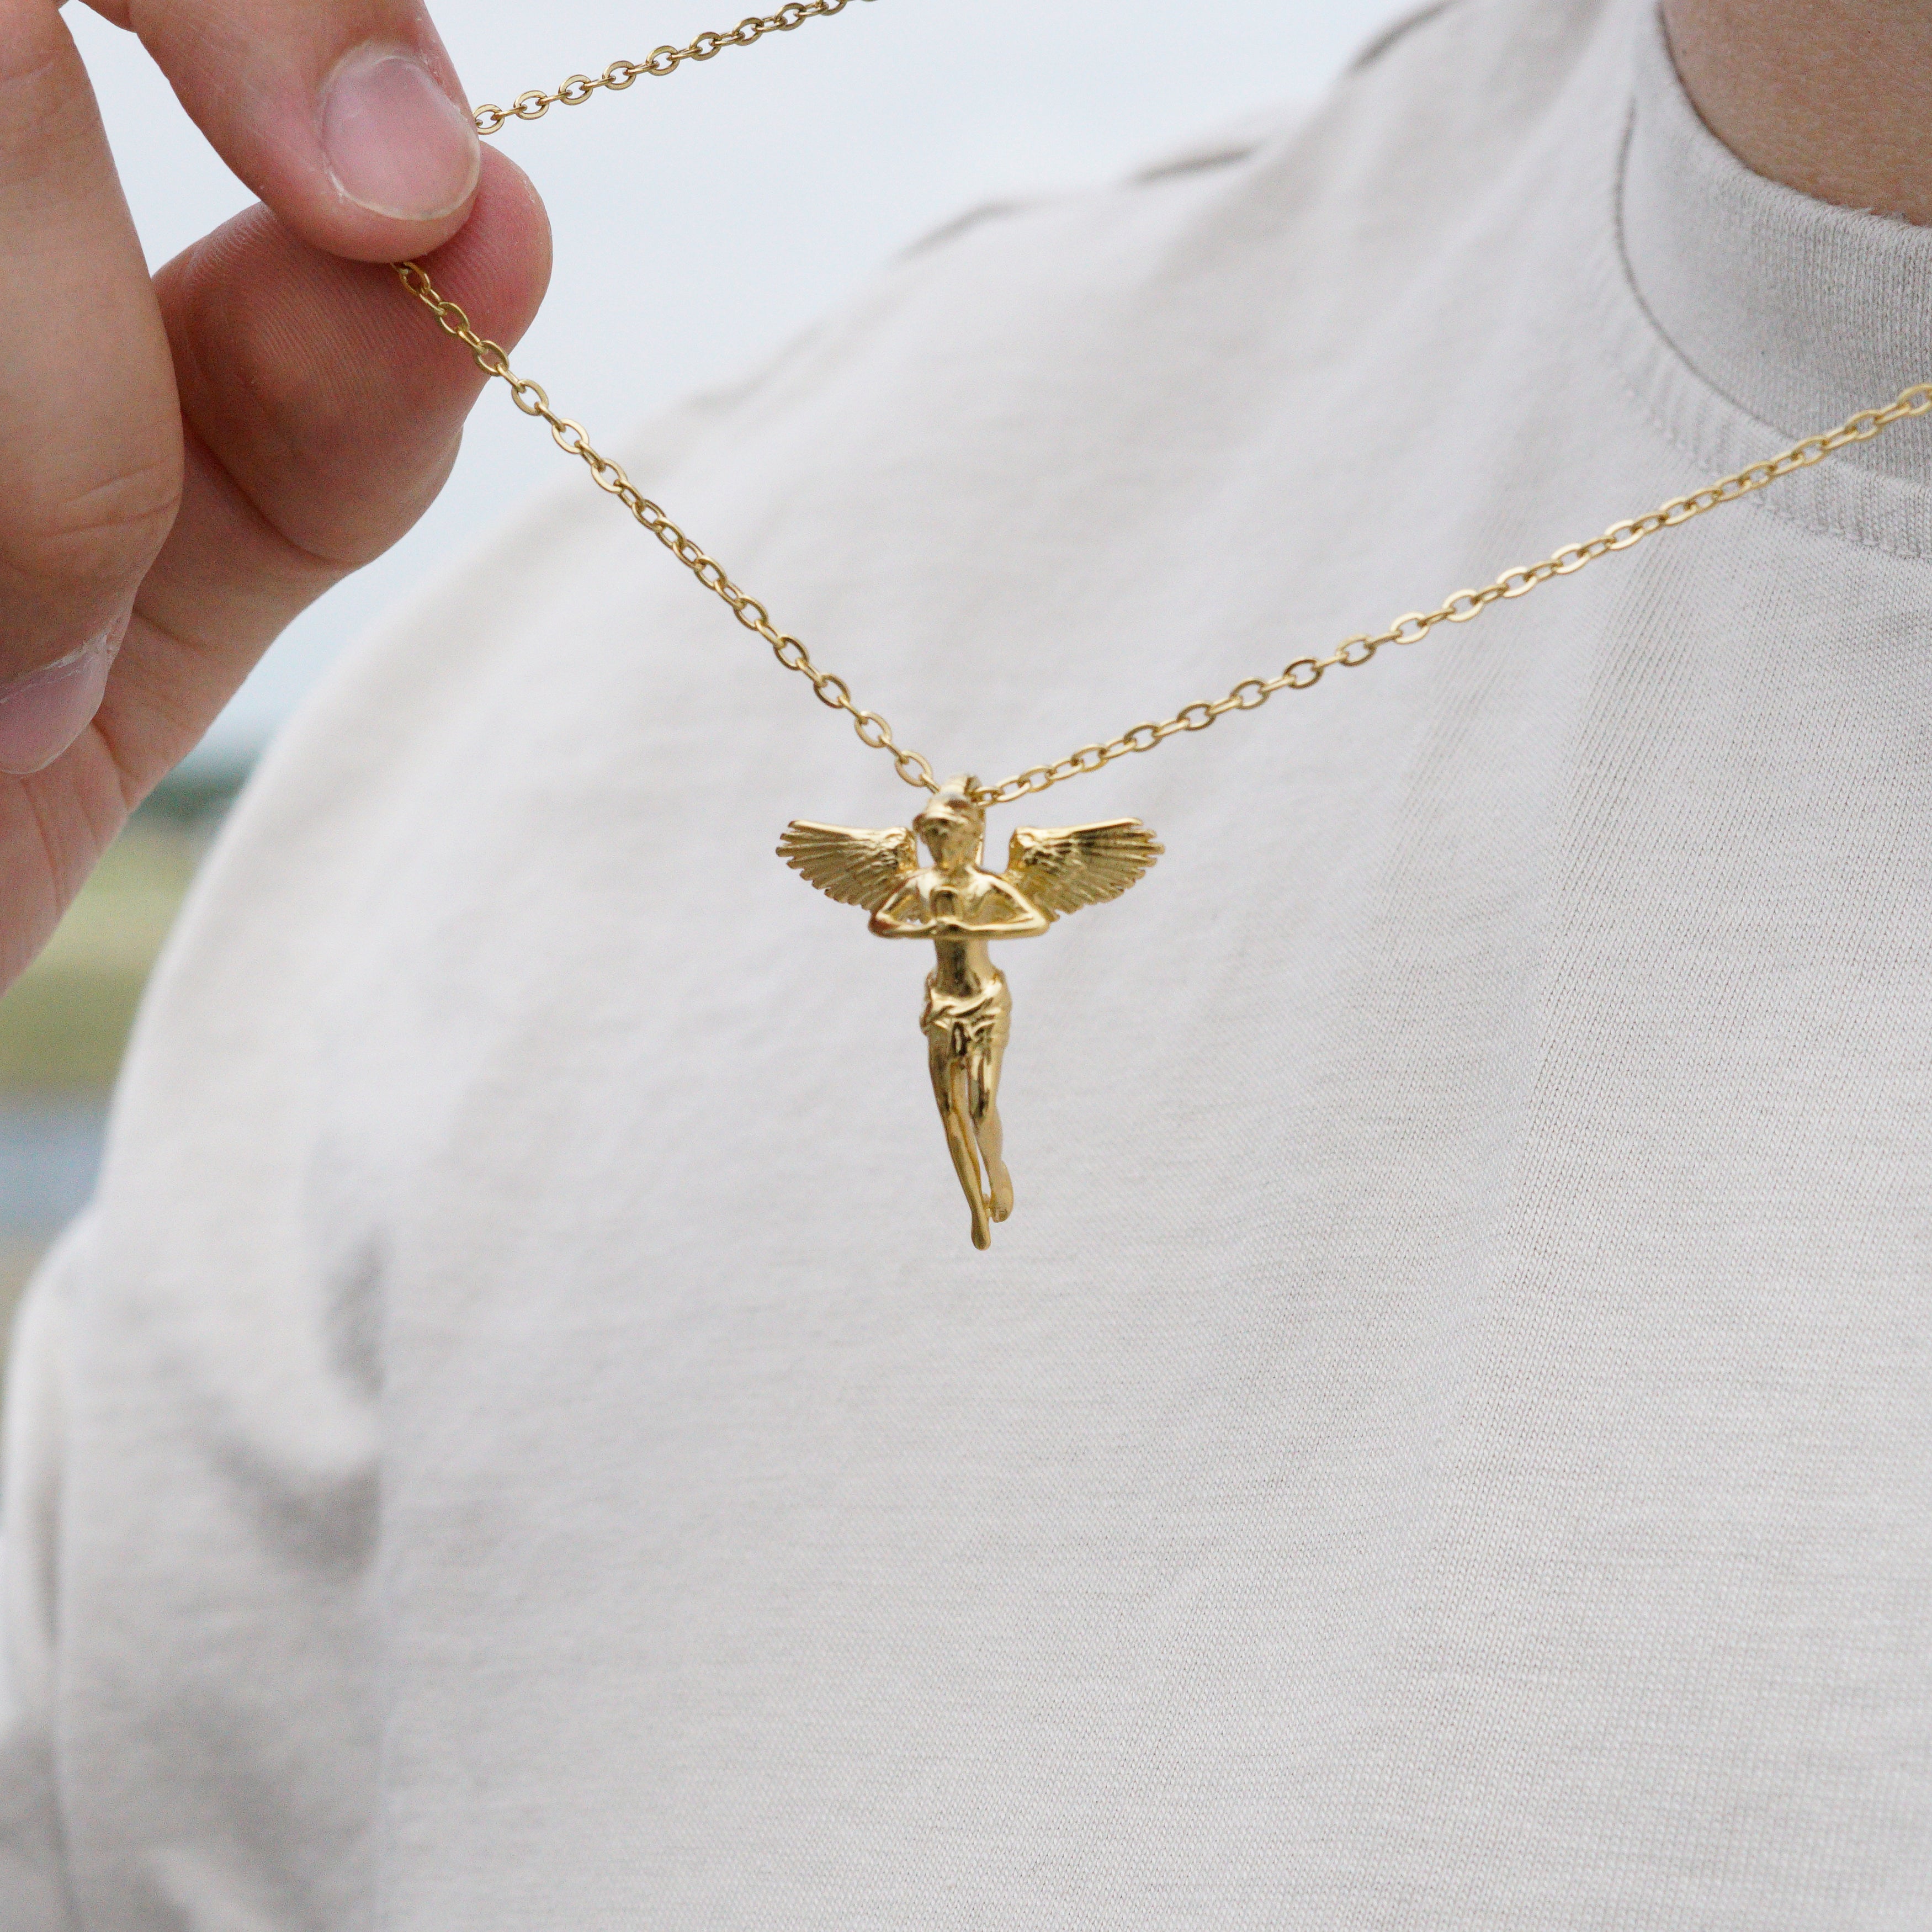 FLYING ANGEL NECKLACE - GOLD